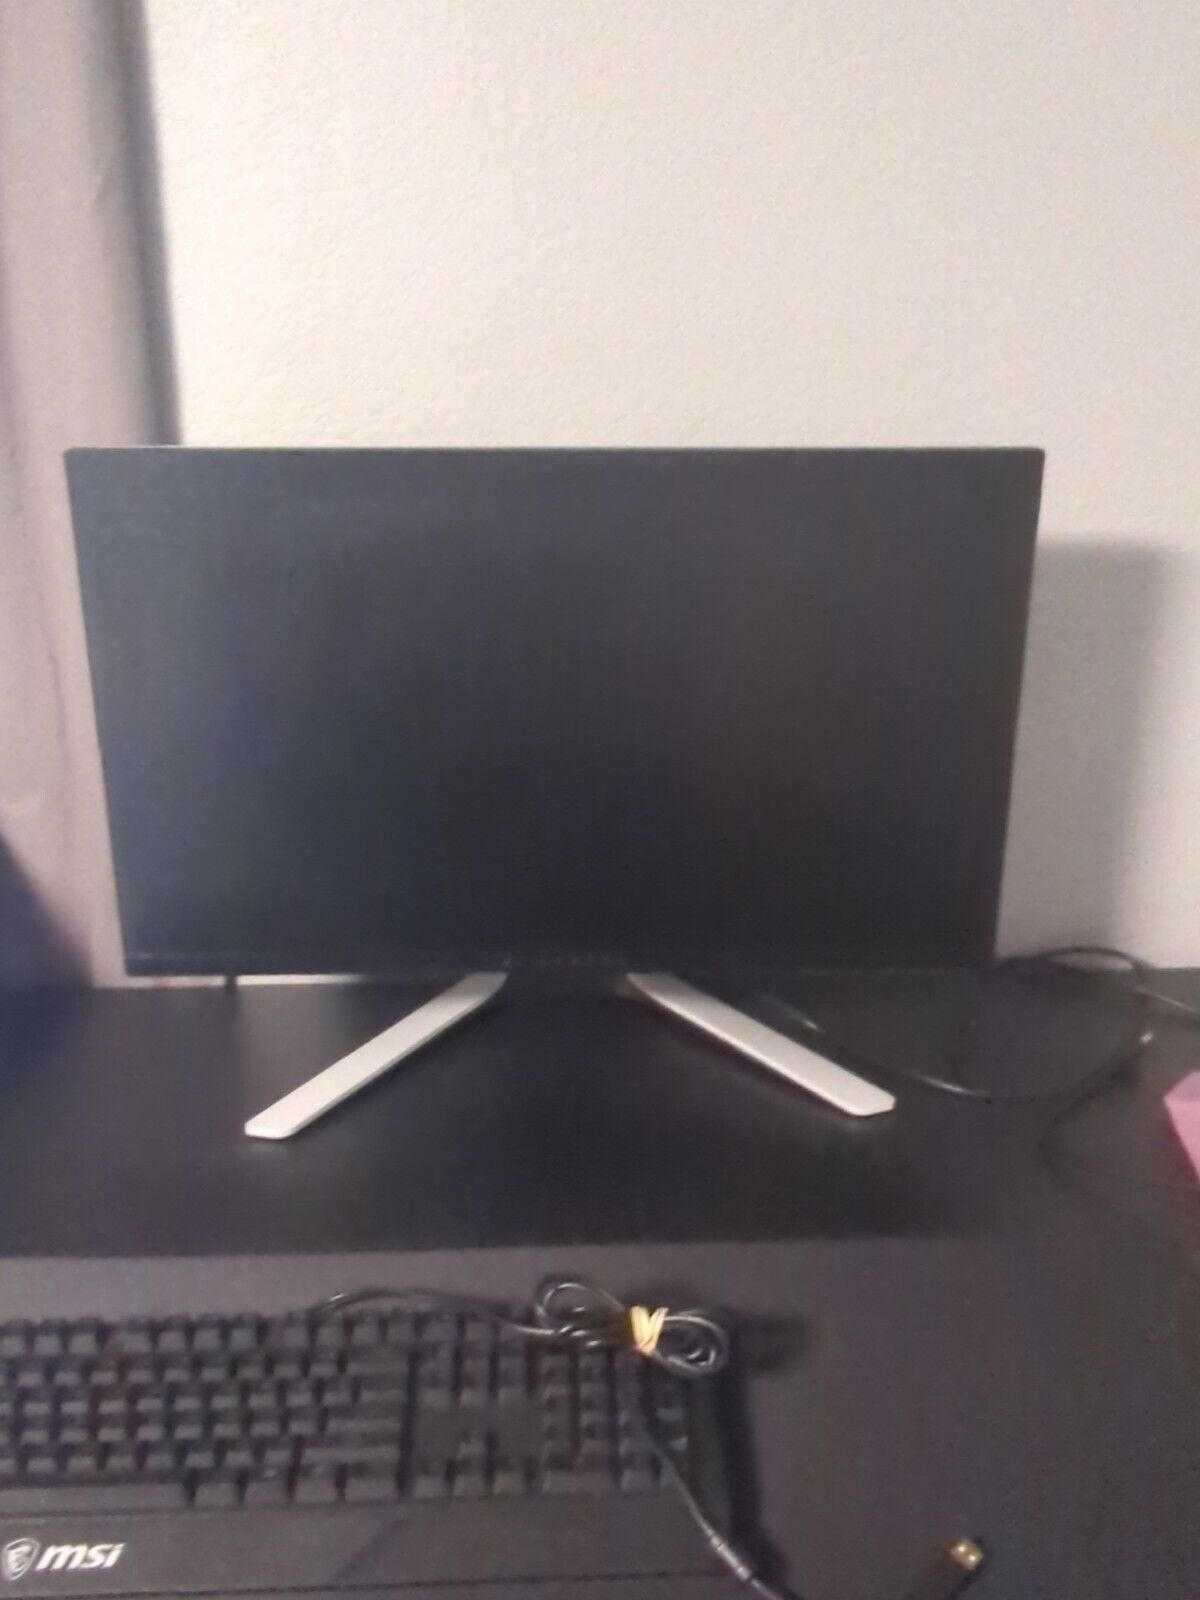 Alienware AW2720HF 27 inch Widescreen LCD Monitor